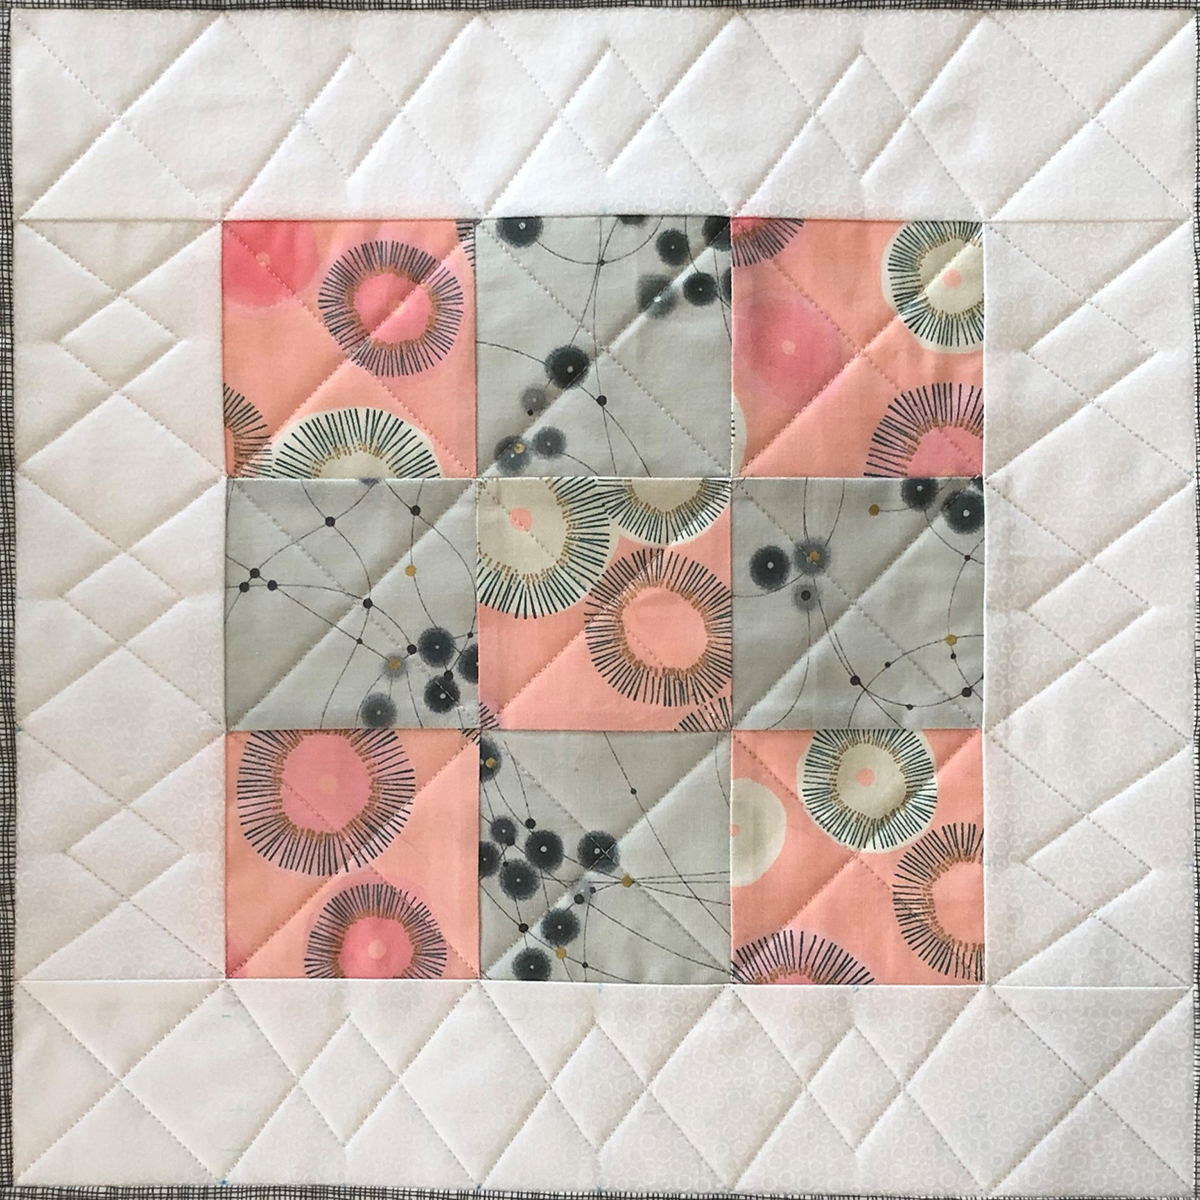 How to get a grip on your quilt - WeAllSew